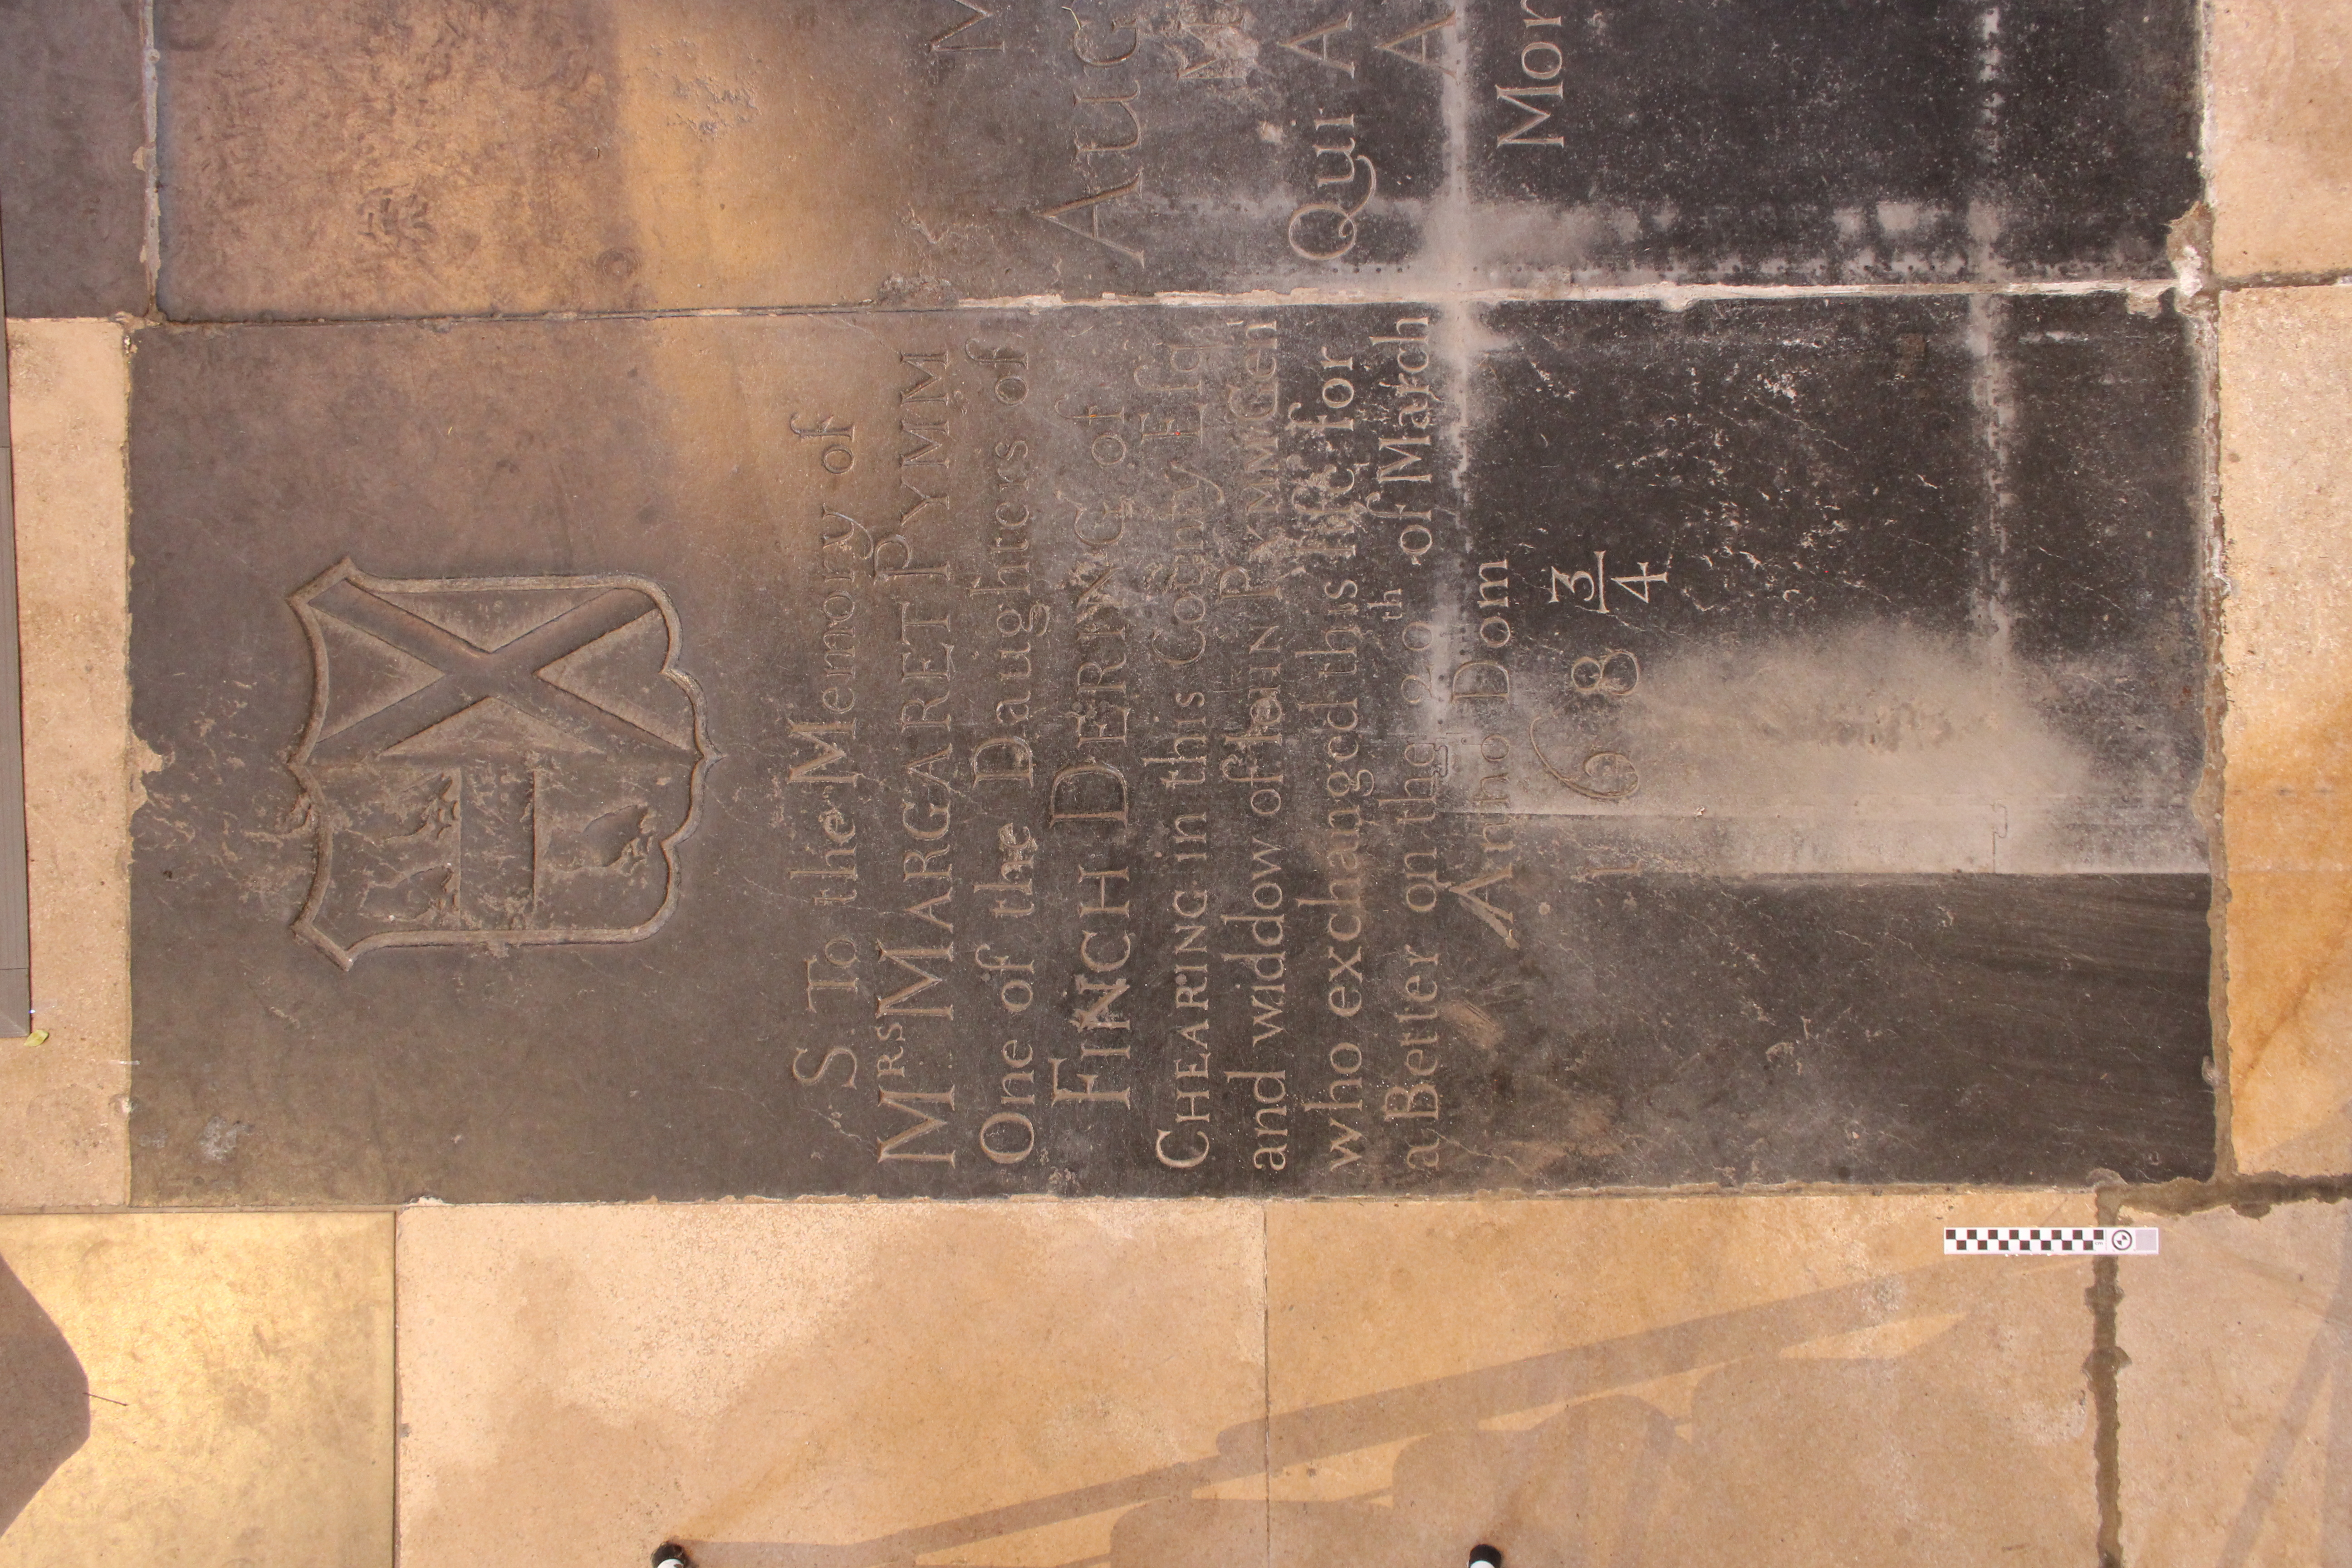 Photograph of the ledger stone dedicated to Margaret Pymm in the north nave transept.